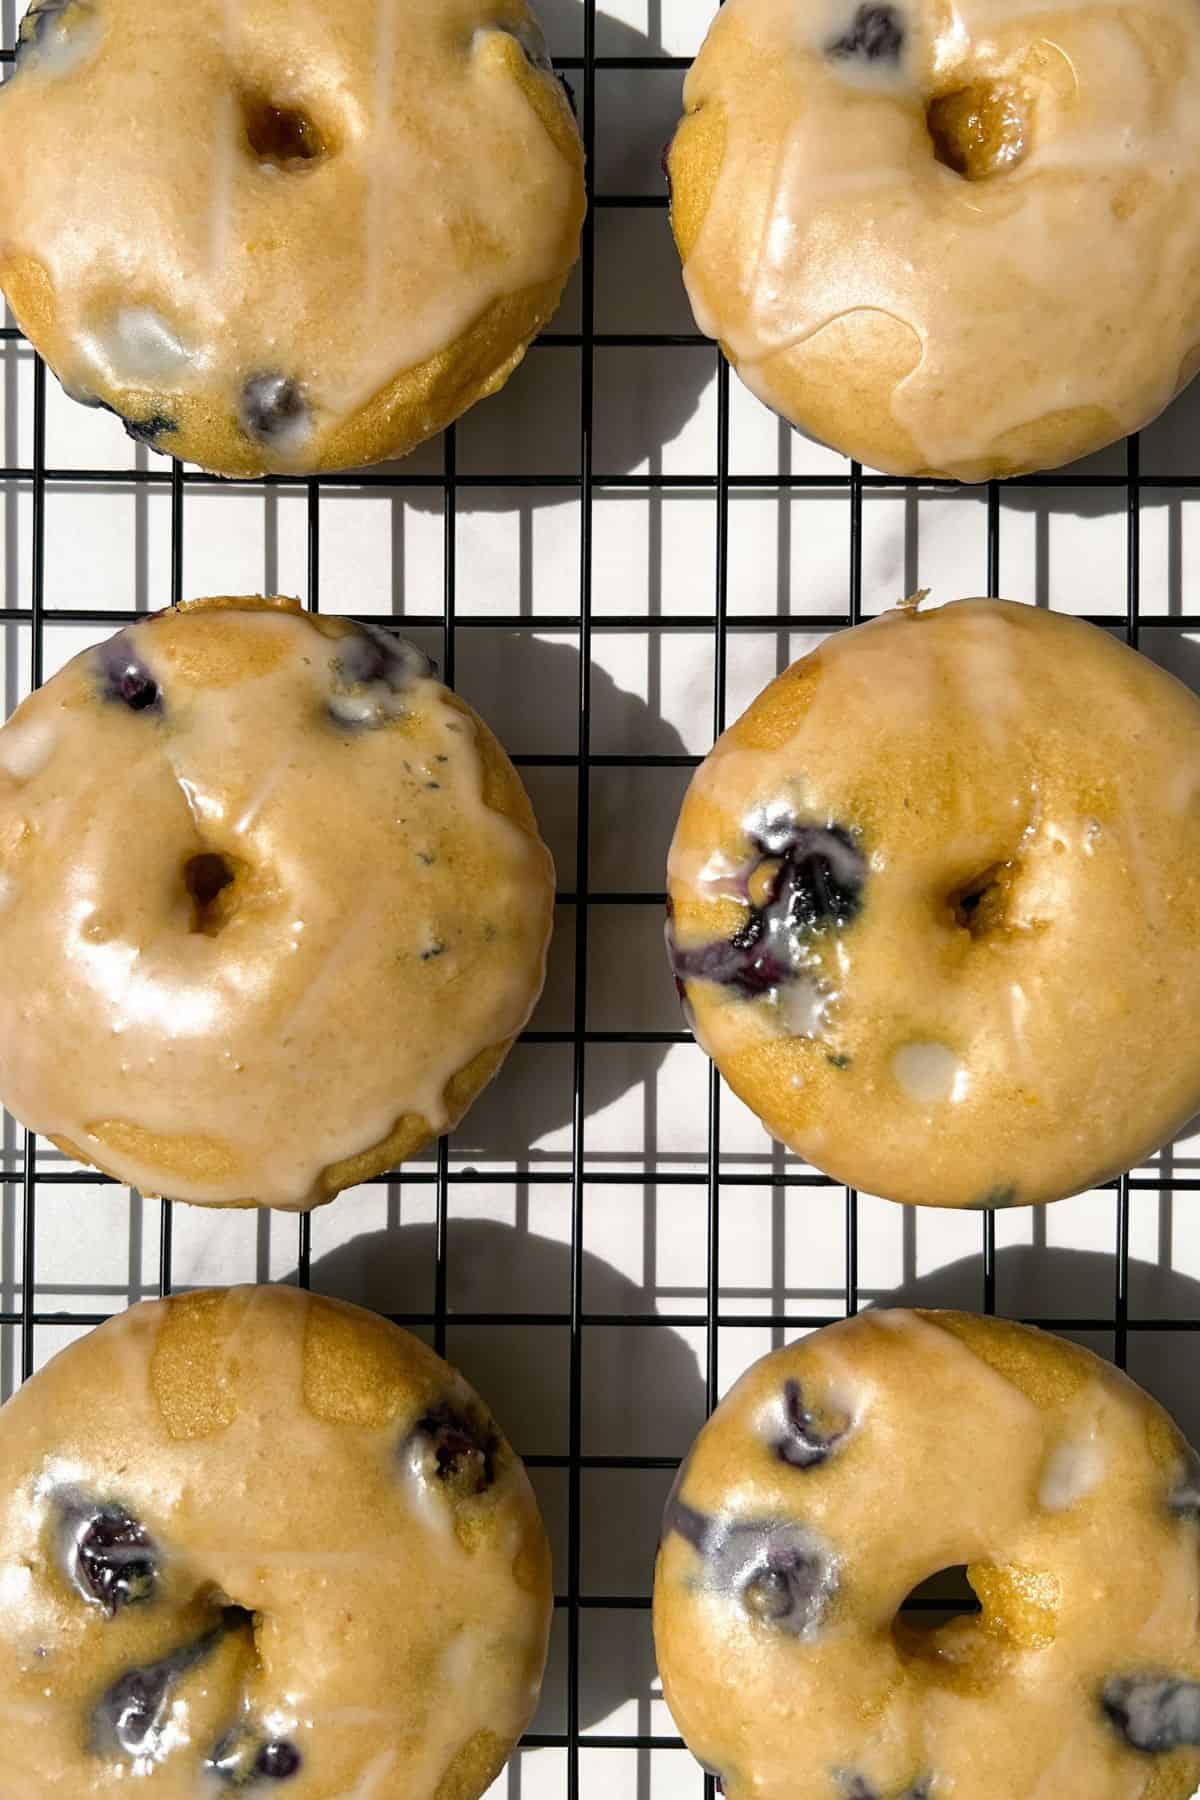 Blueberry cake donuts topped with a vanilla glaze.